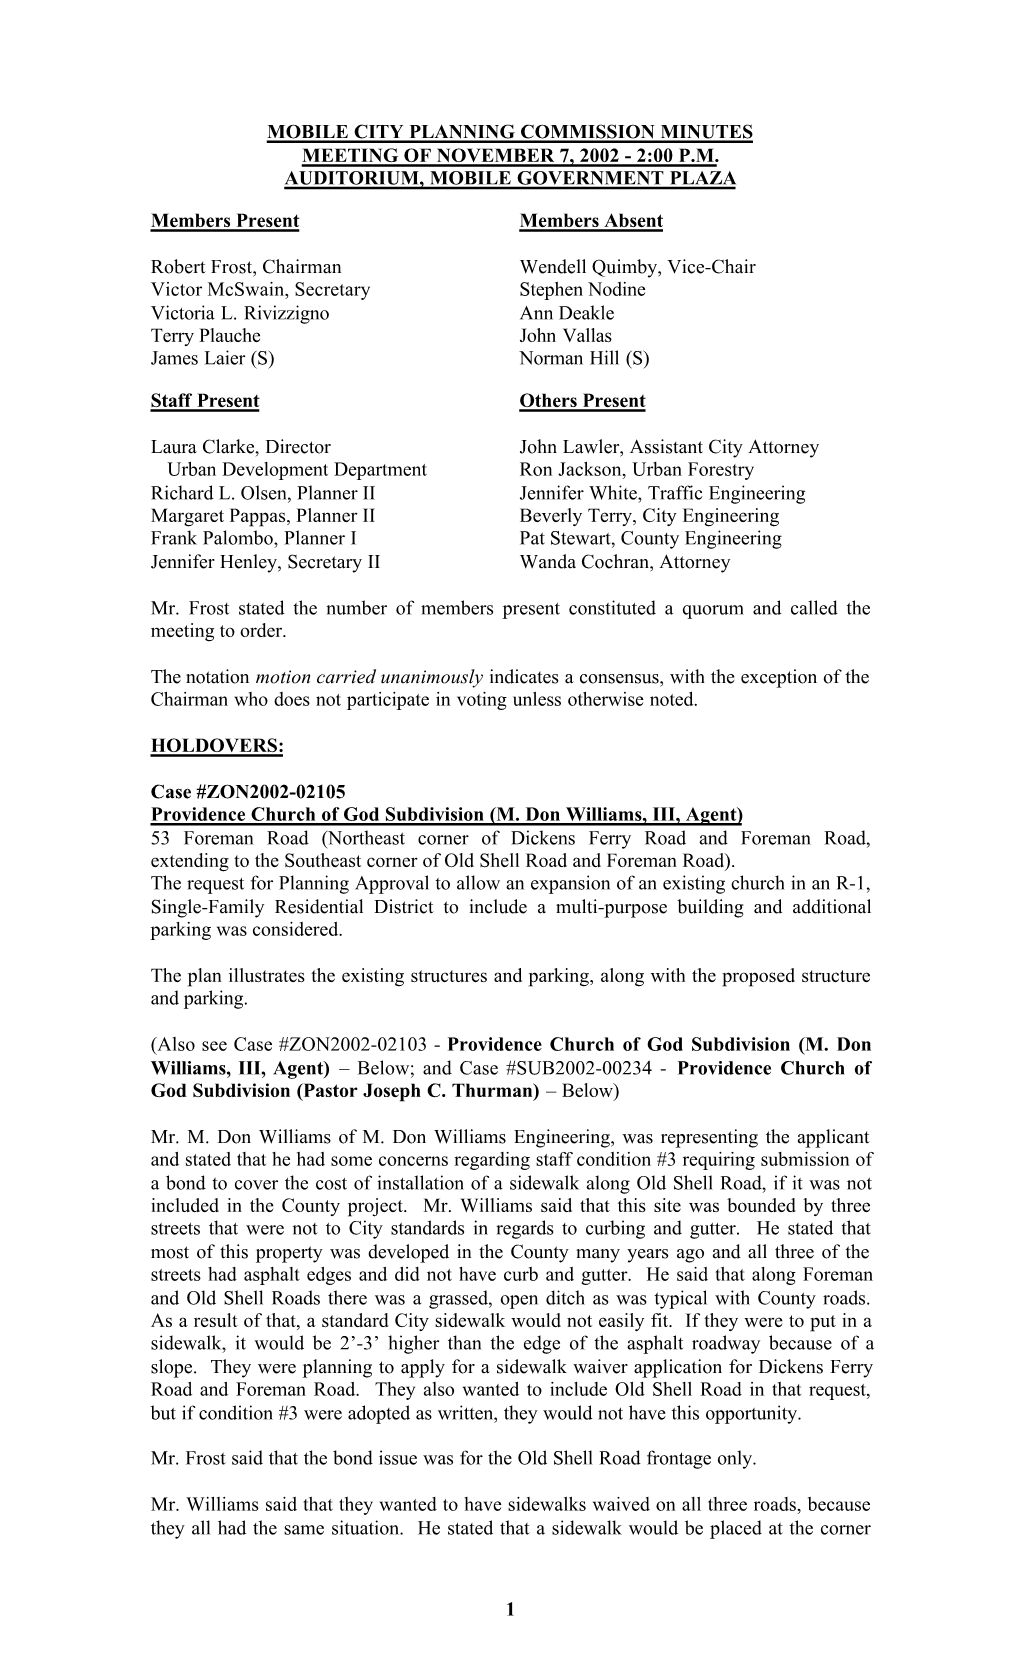 Mobile City Planning Commission Minutes Meeting of November 7, 2002 - 2:00 P.M